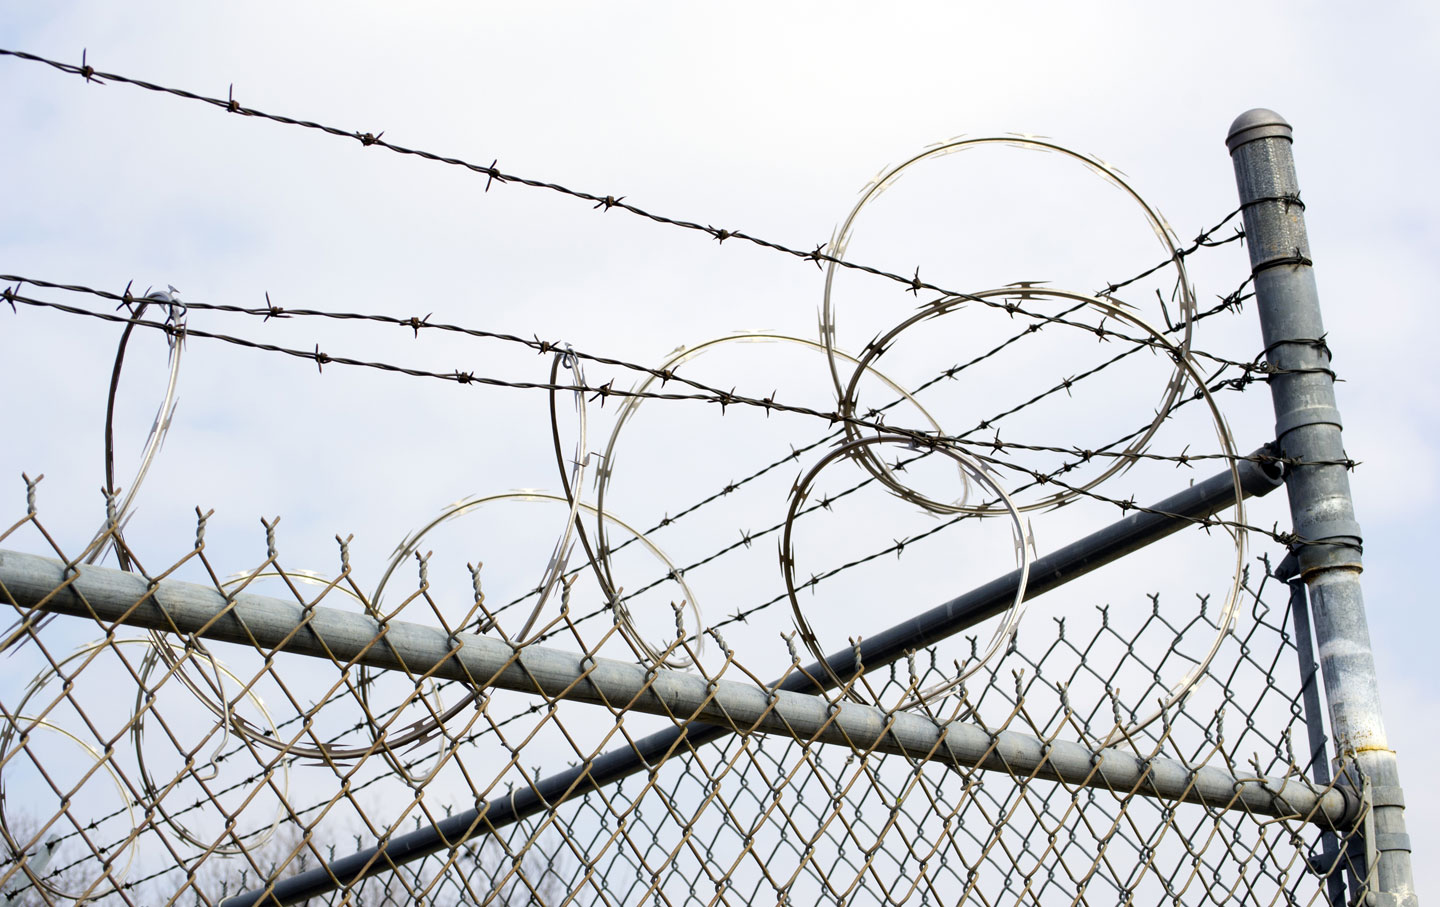 Are Americans Finally Facing Up to the True Costs of Mass Incarceration?